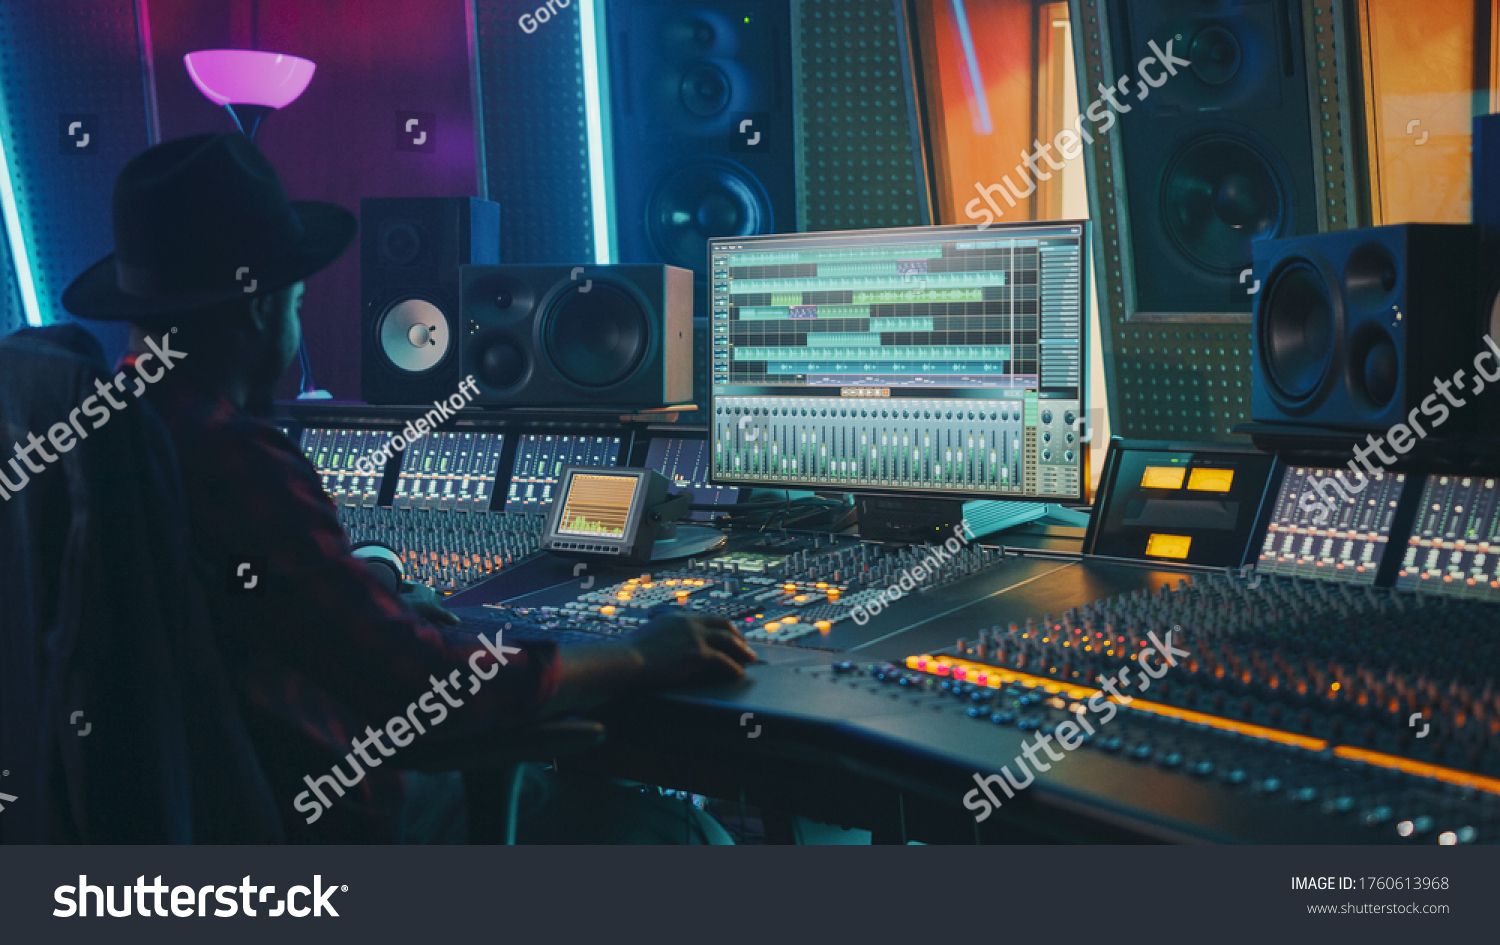 Portrait of Audio Engineer Working in Music Recording Studio, Uses Mixing Board Create Modern Sound. Successful Black Artist Musician Working at Control Desk. #1760613968